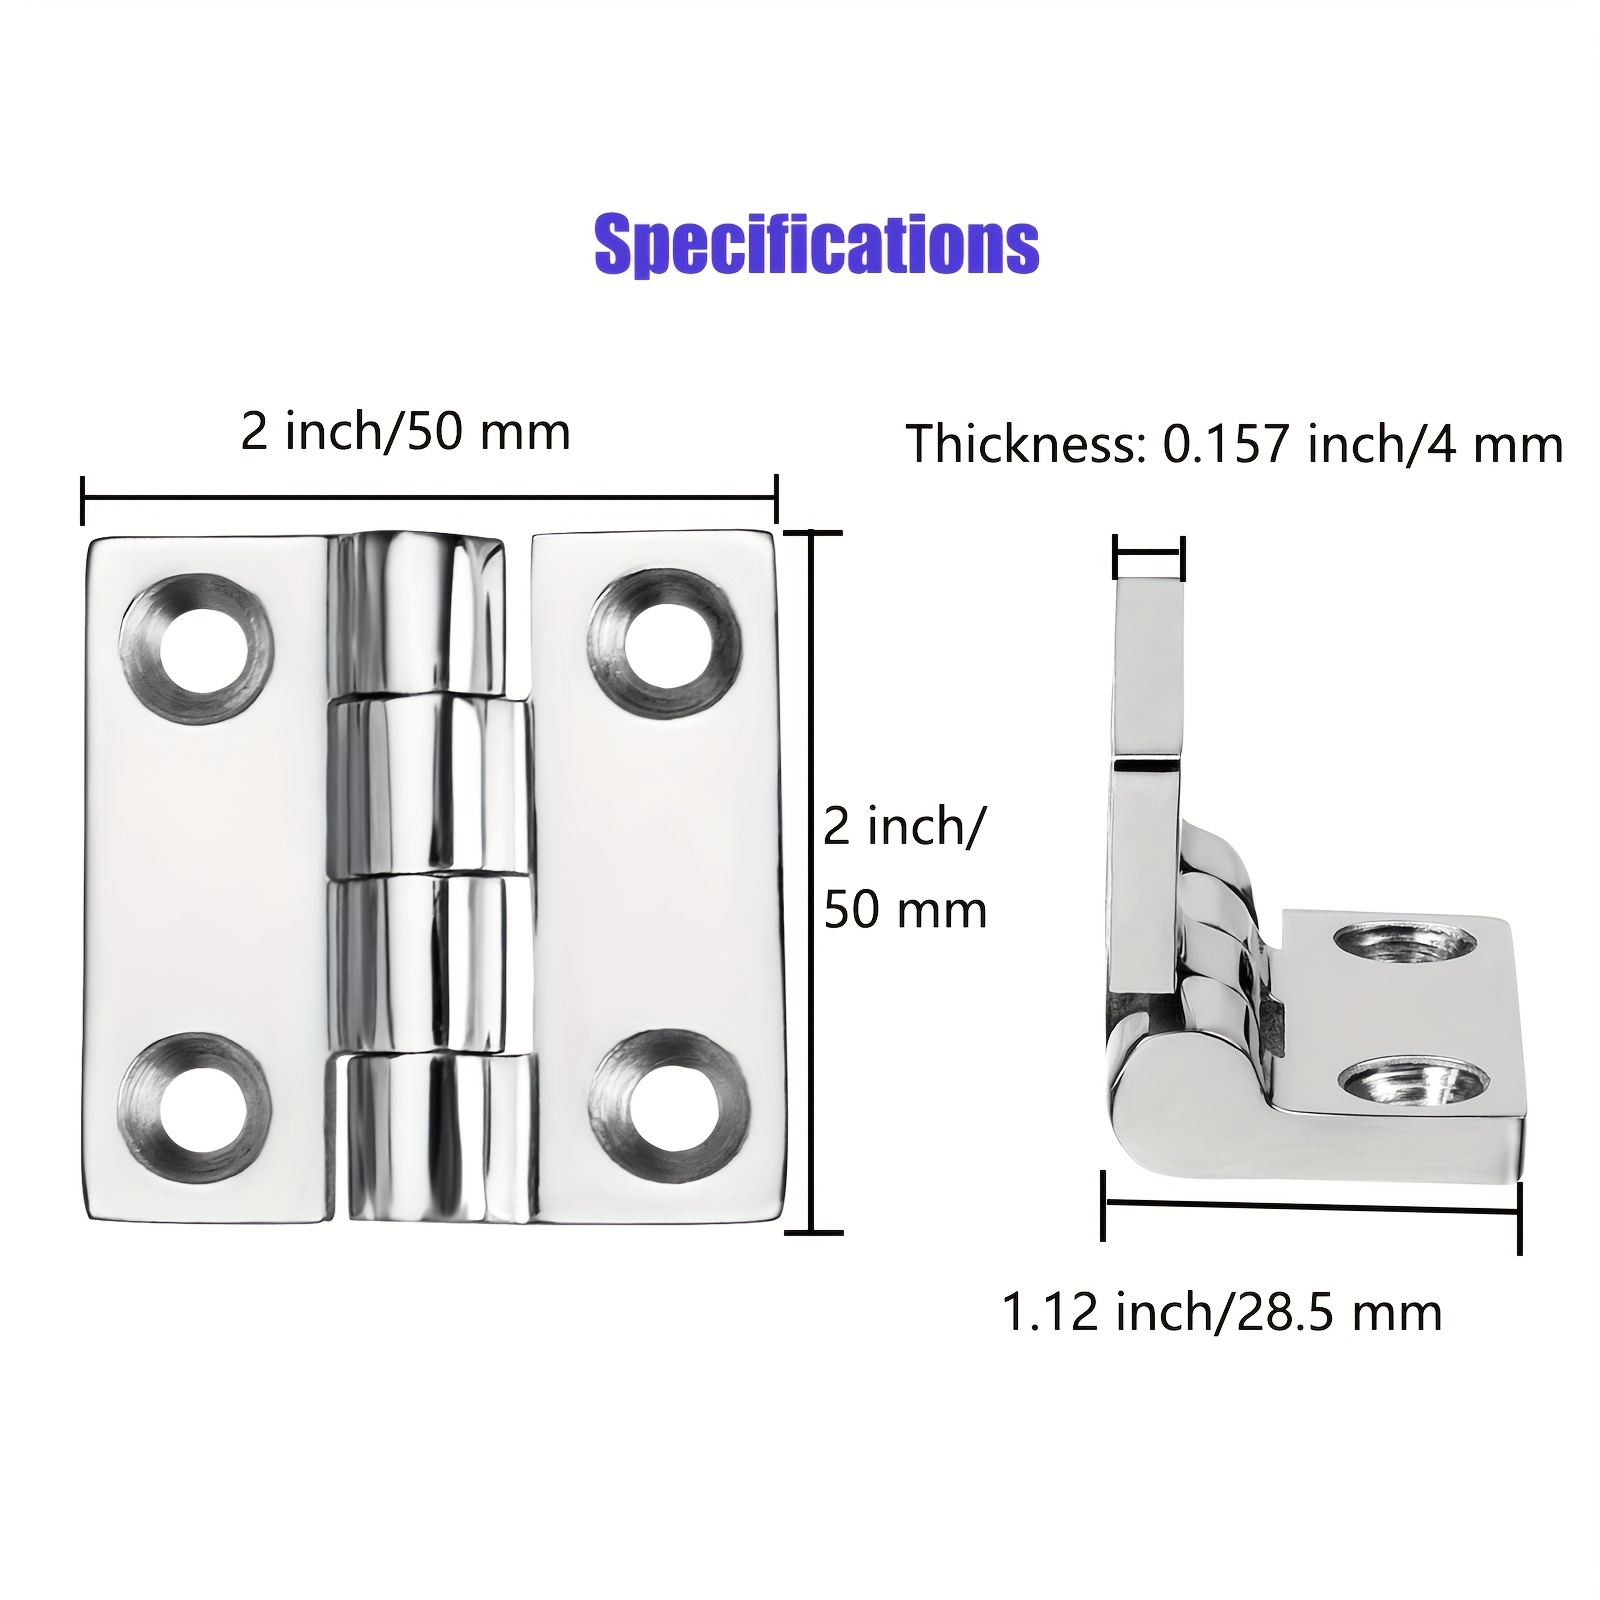 Stainless Steel Boat Hinges Marine Grade Hinges 2x2in 50x50mm